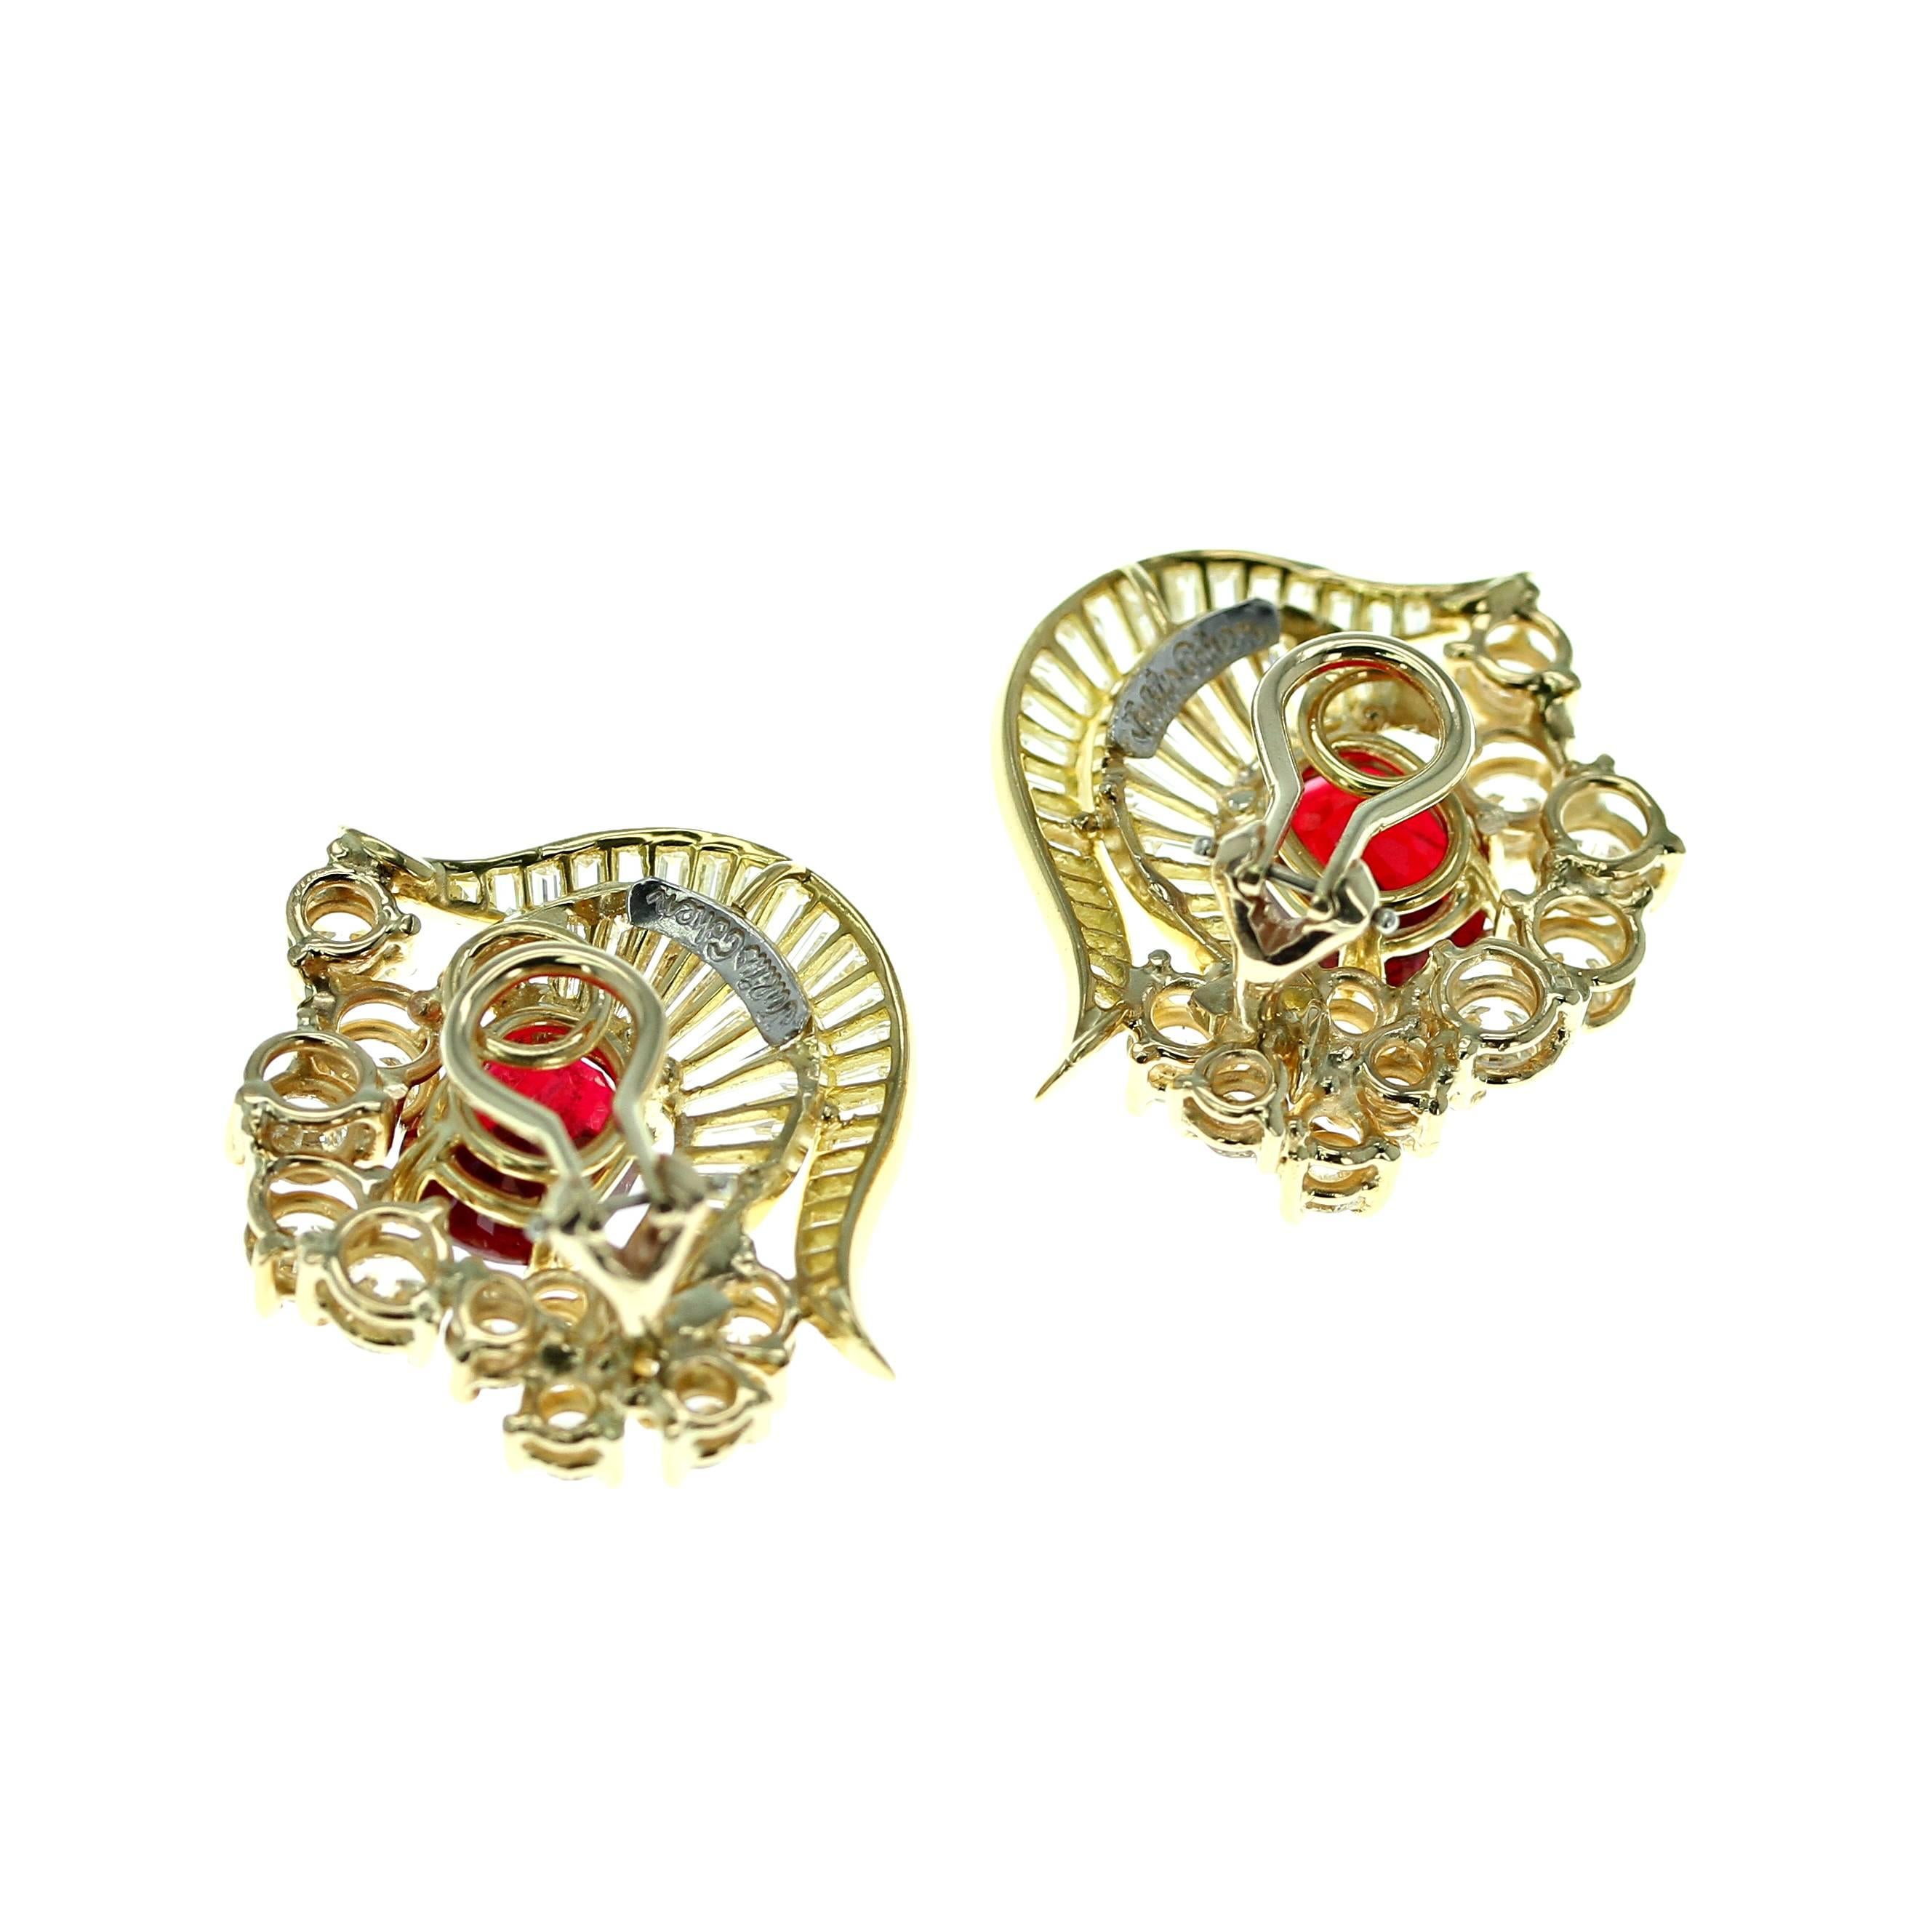 An elaborate pair of yellow gold earrings set with two cushion shape natural, no heat spinels from Burma (Myanmar), weighing over six carats total, accented with two hooves set with diamond baguettes and a row of round brilliant-cut diamonds; french